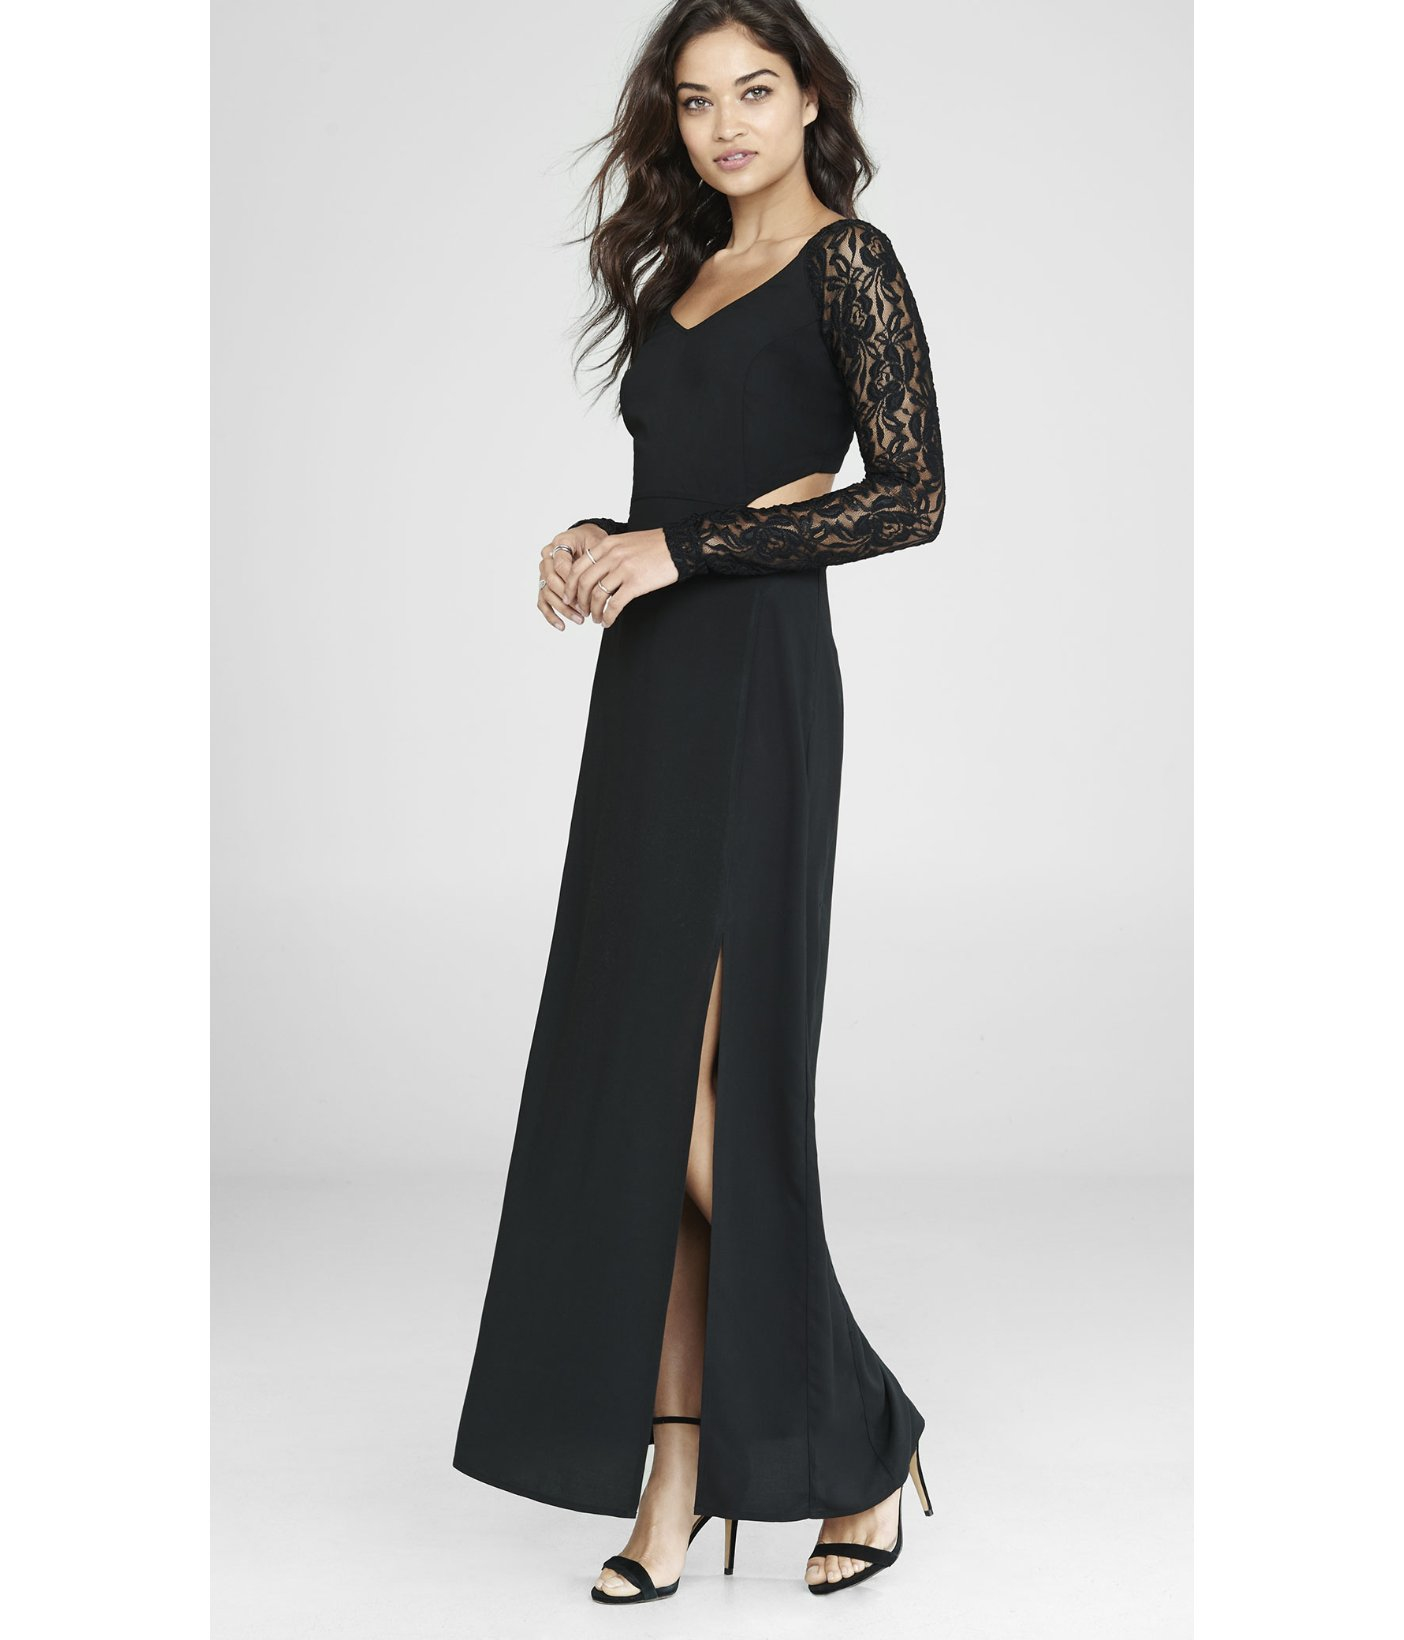 Express Black Lace Sleeve Cut-out Maxi Dress - Lyst